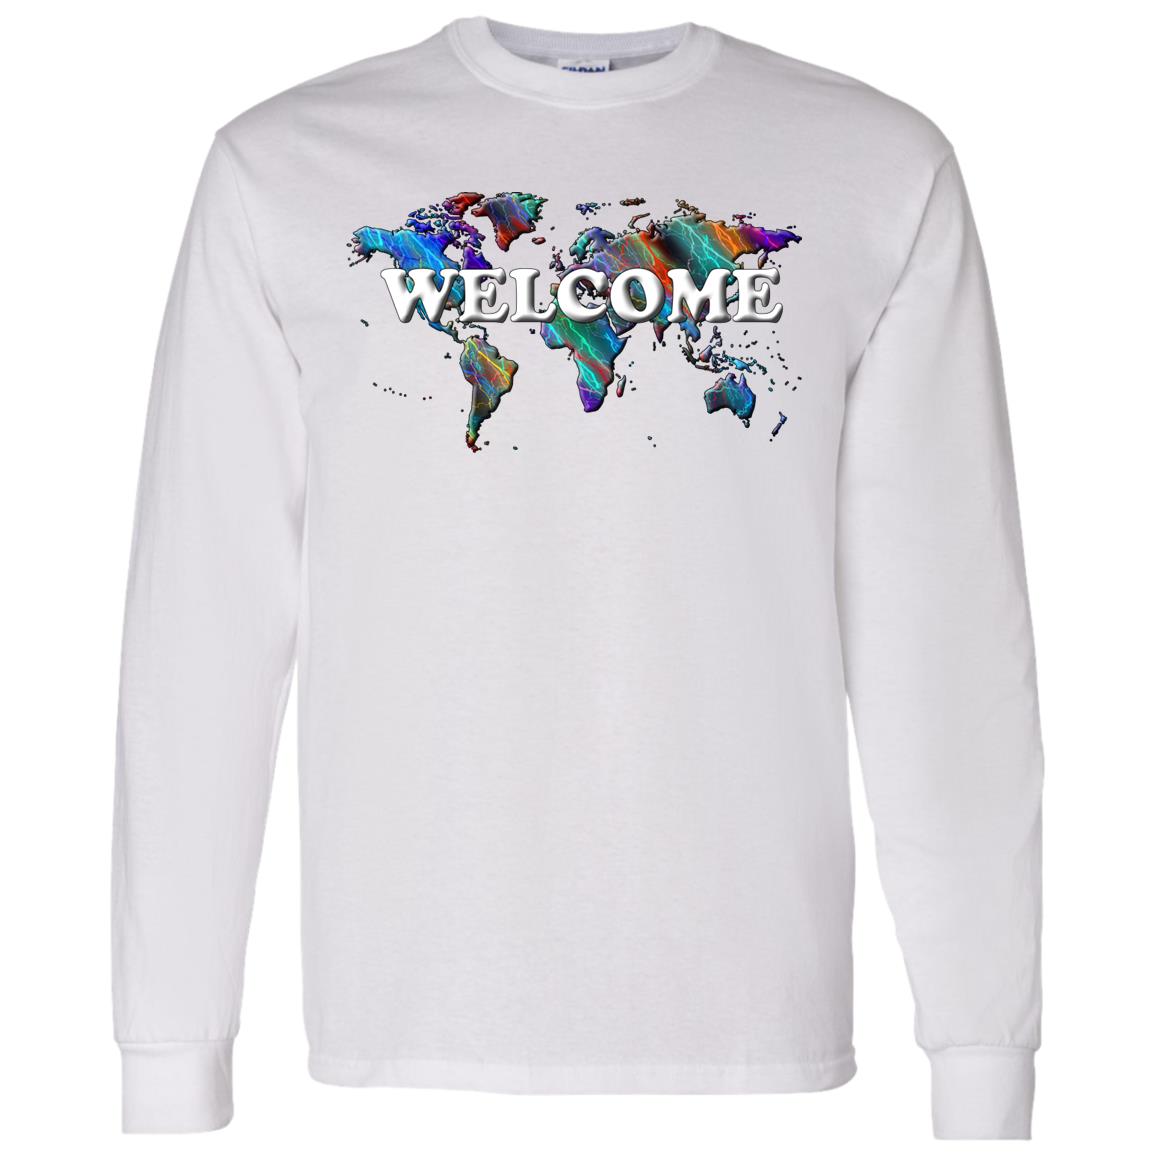 Welcome Long Sleeve Statement T-Shirt